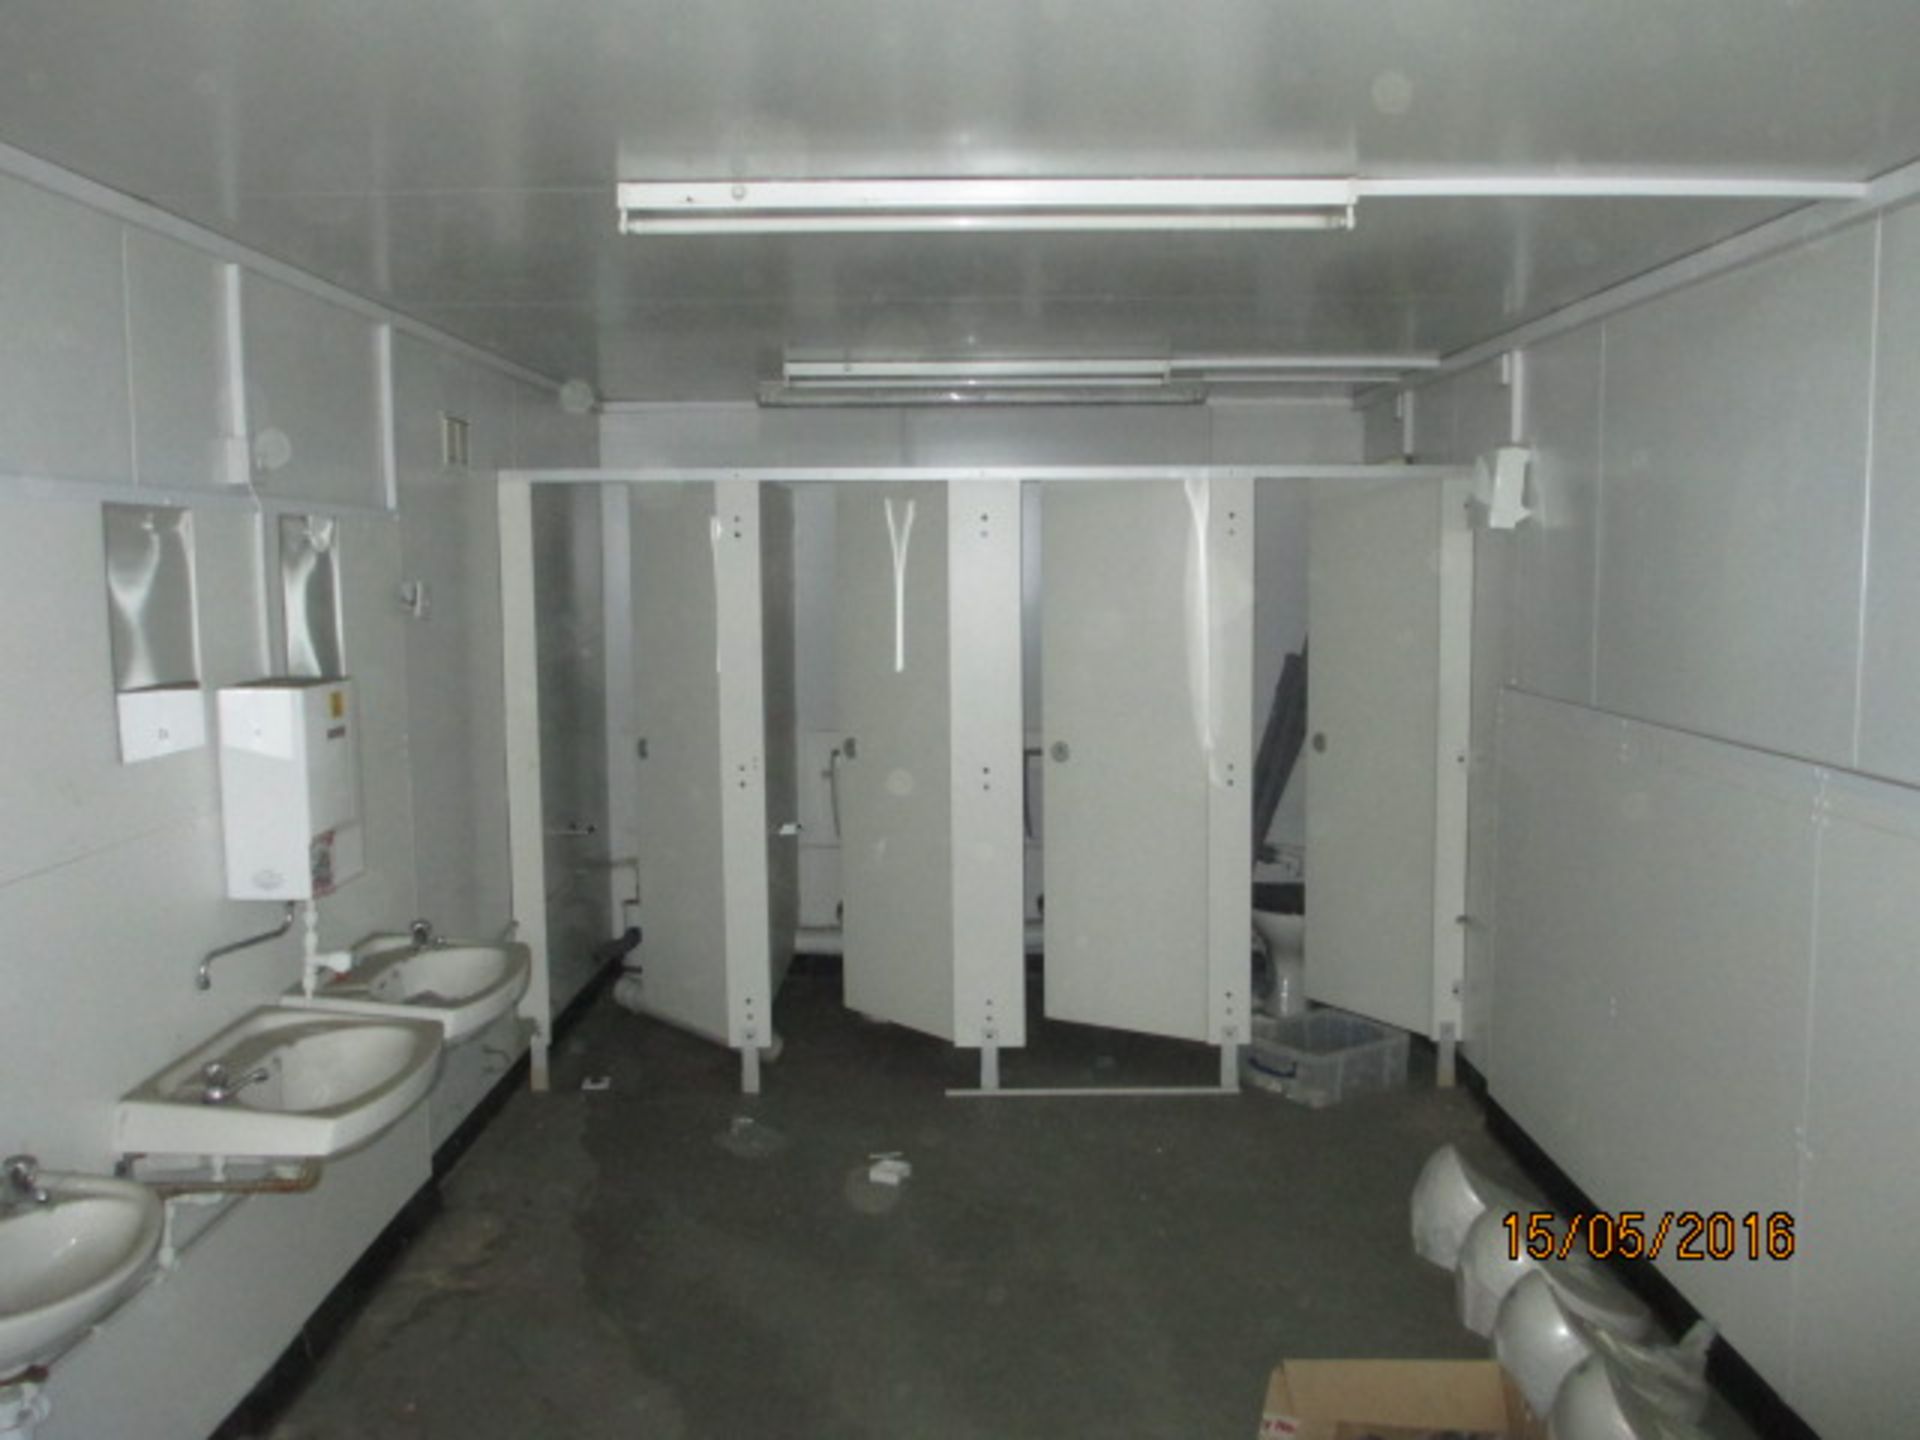 E41209 32X10 STEELCLAD -TOILET - Image 4 of 6